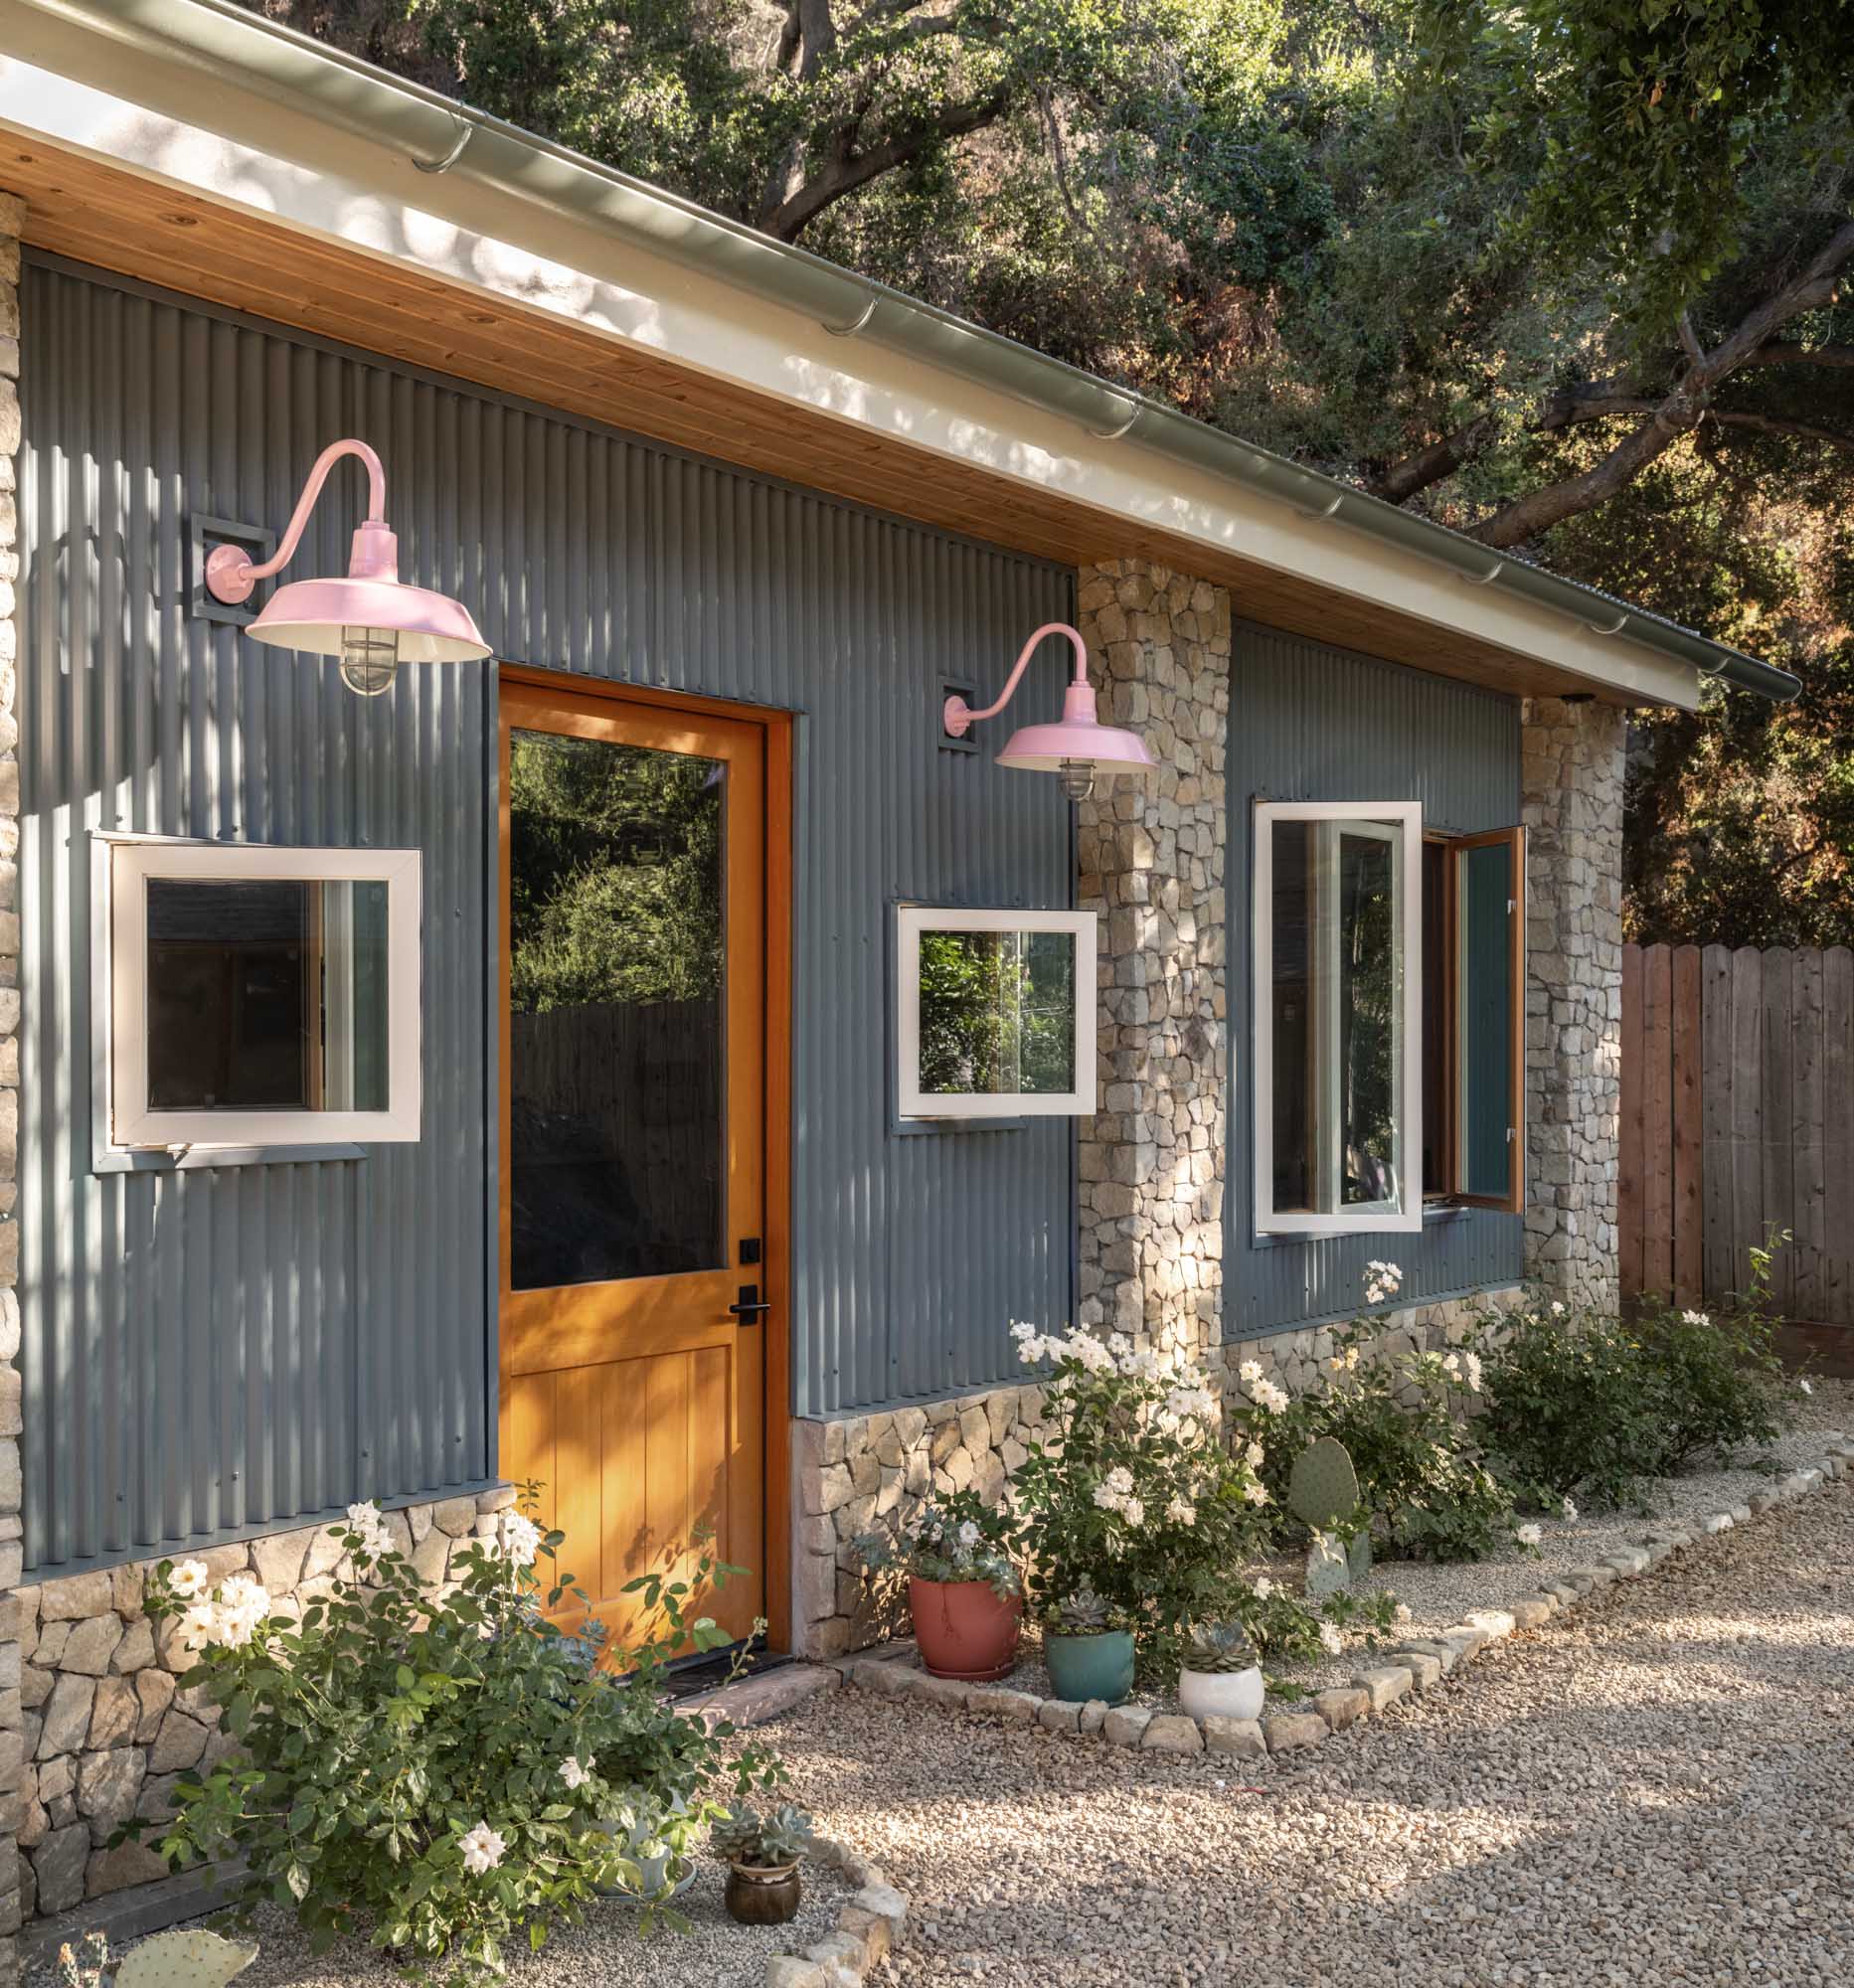 Colorful Handcrafted Lighting Adds Flair to Barn Renovation